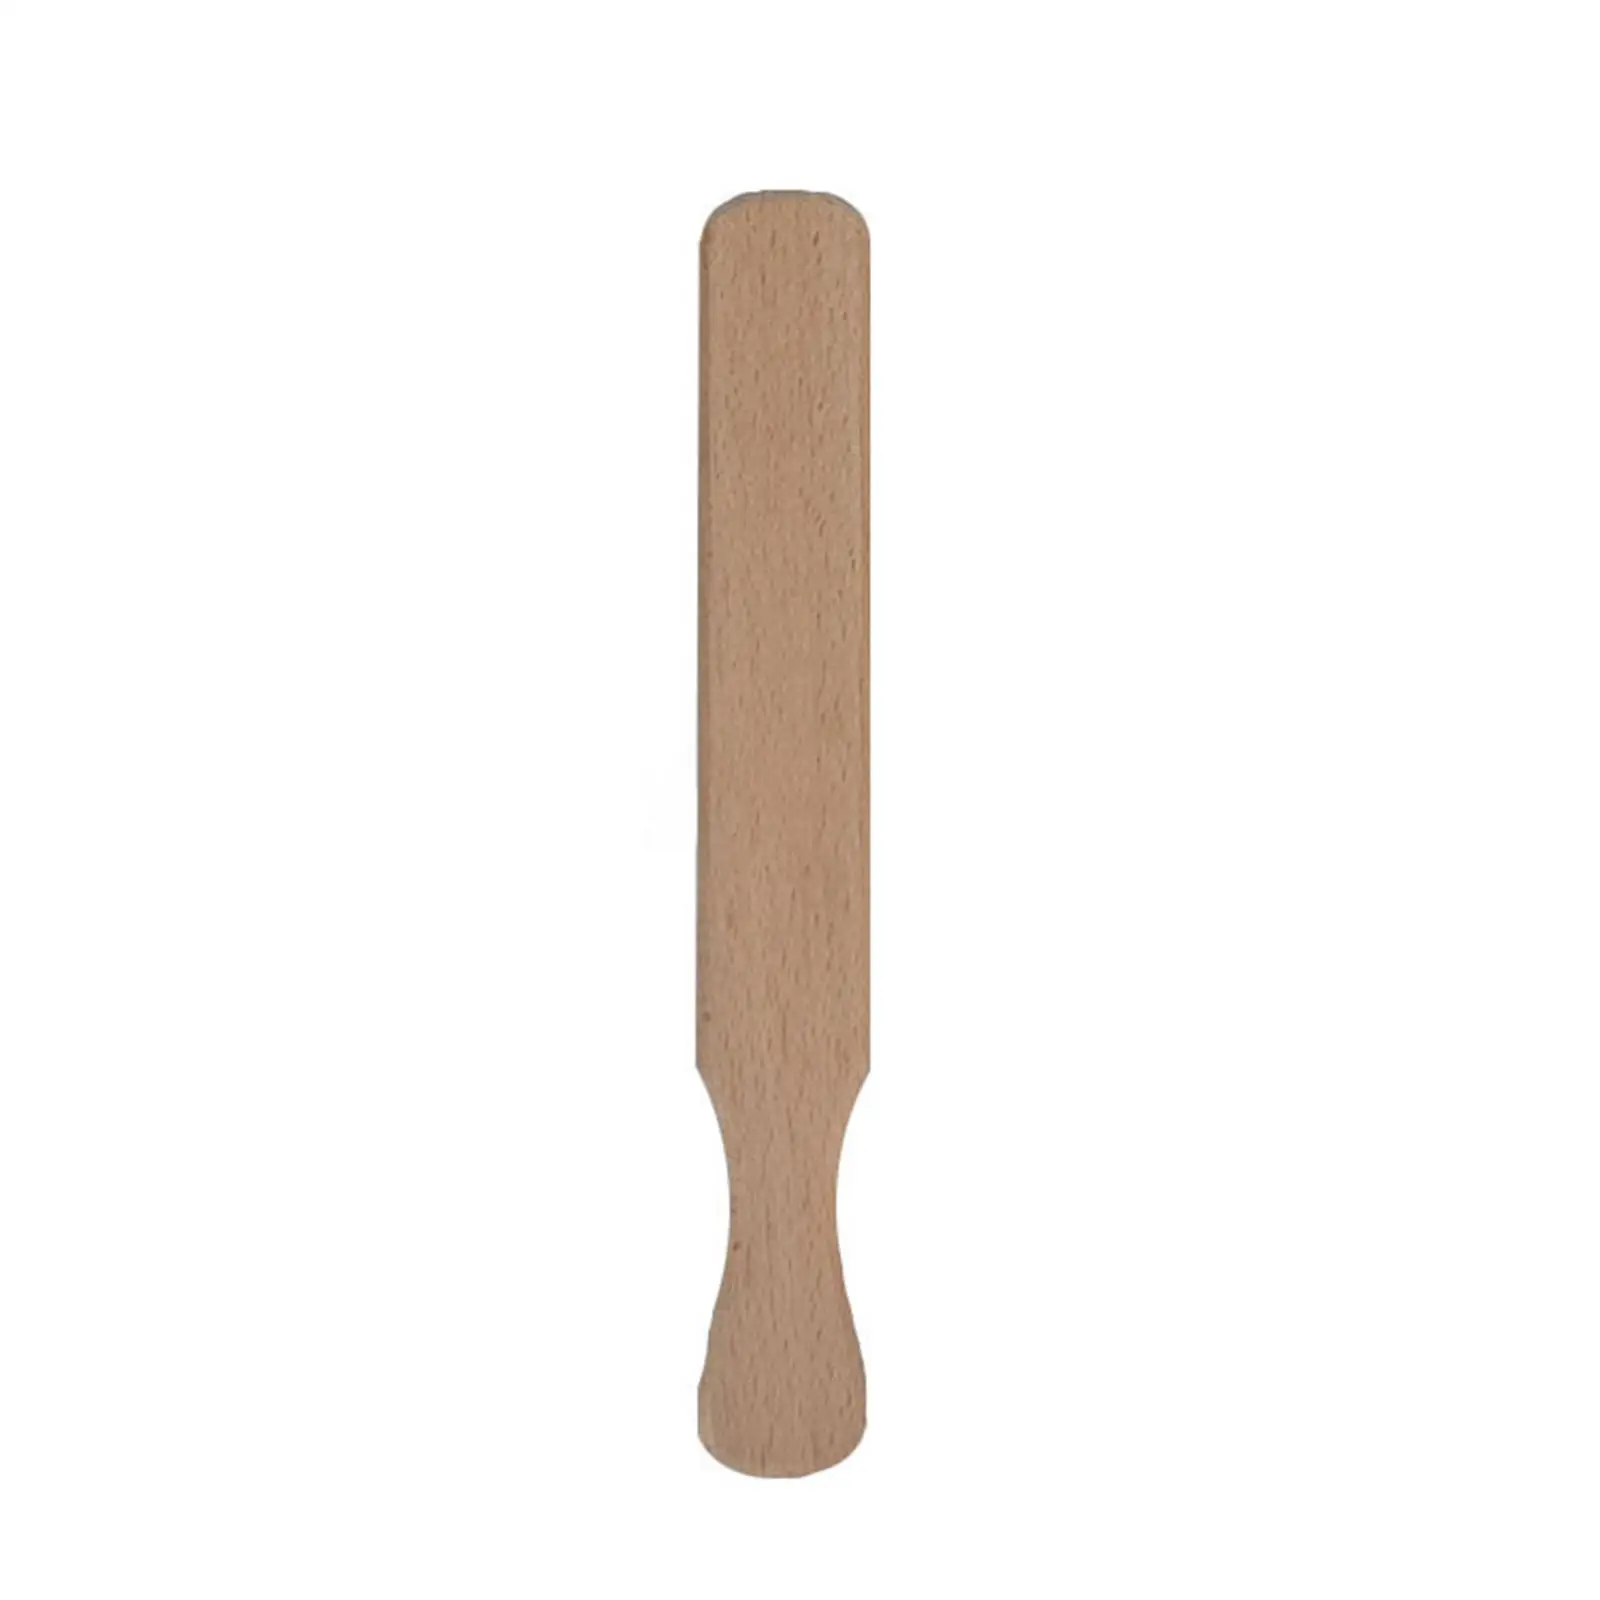 Multi Purpose wood Batter Spreader Kitchen Accessories Wood Cooking Utensil Handcraft Crepes Spreader for Turning